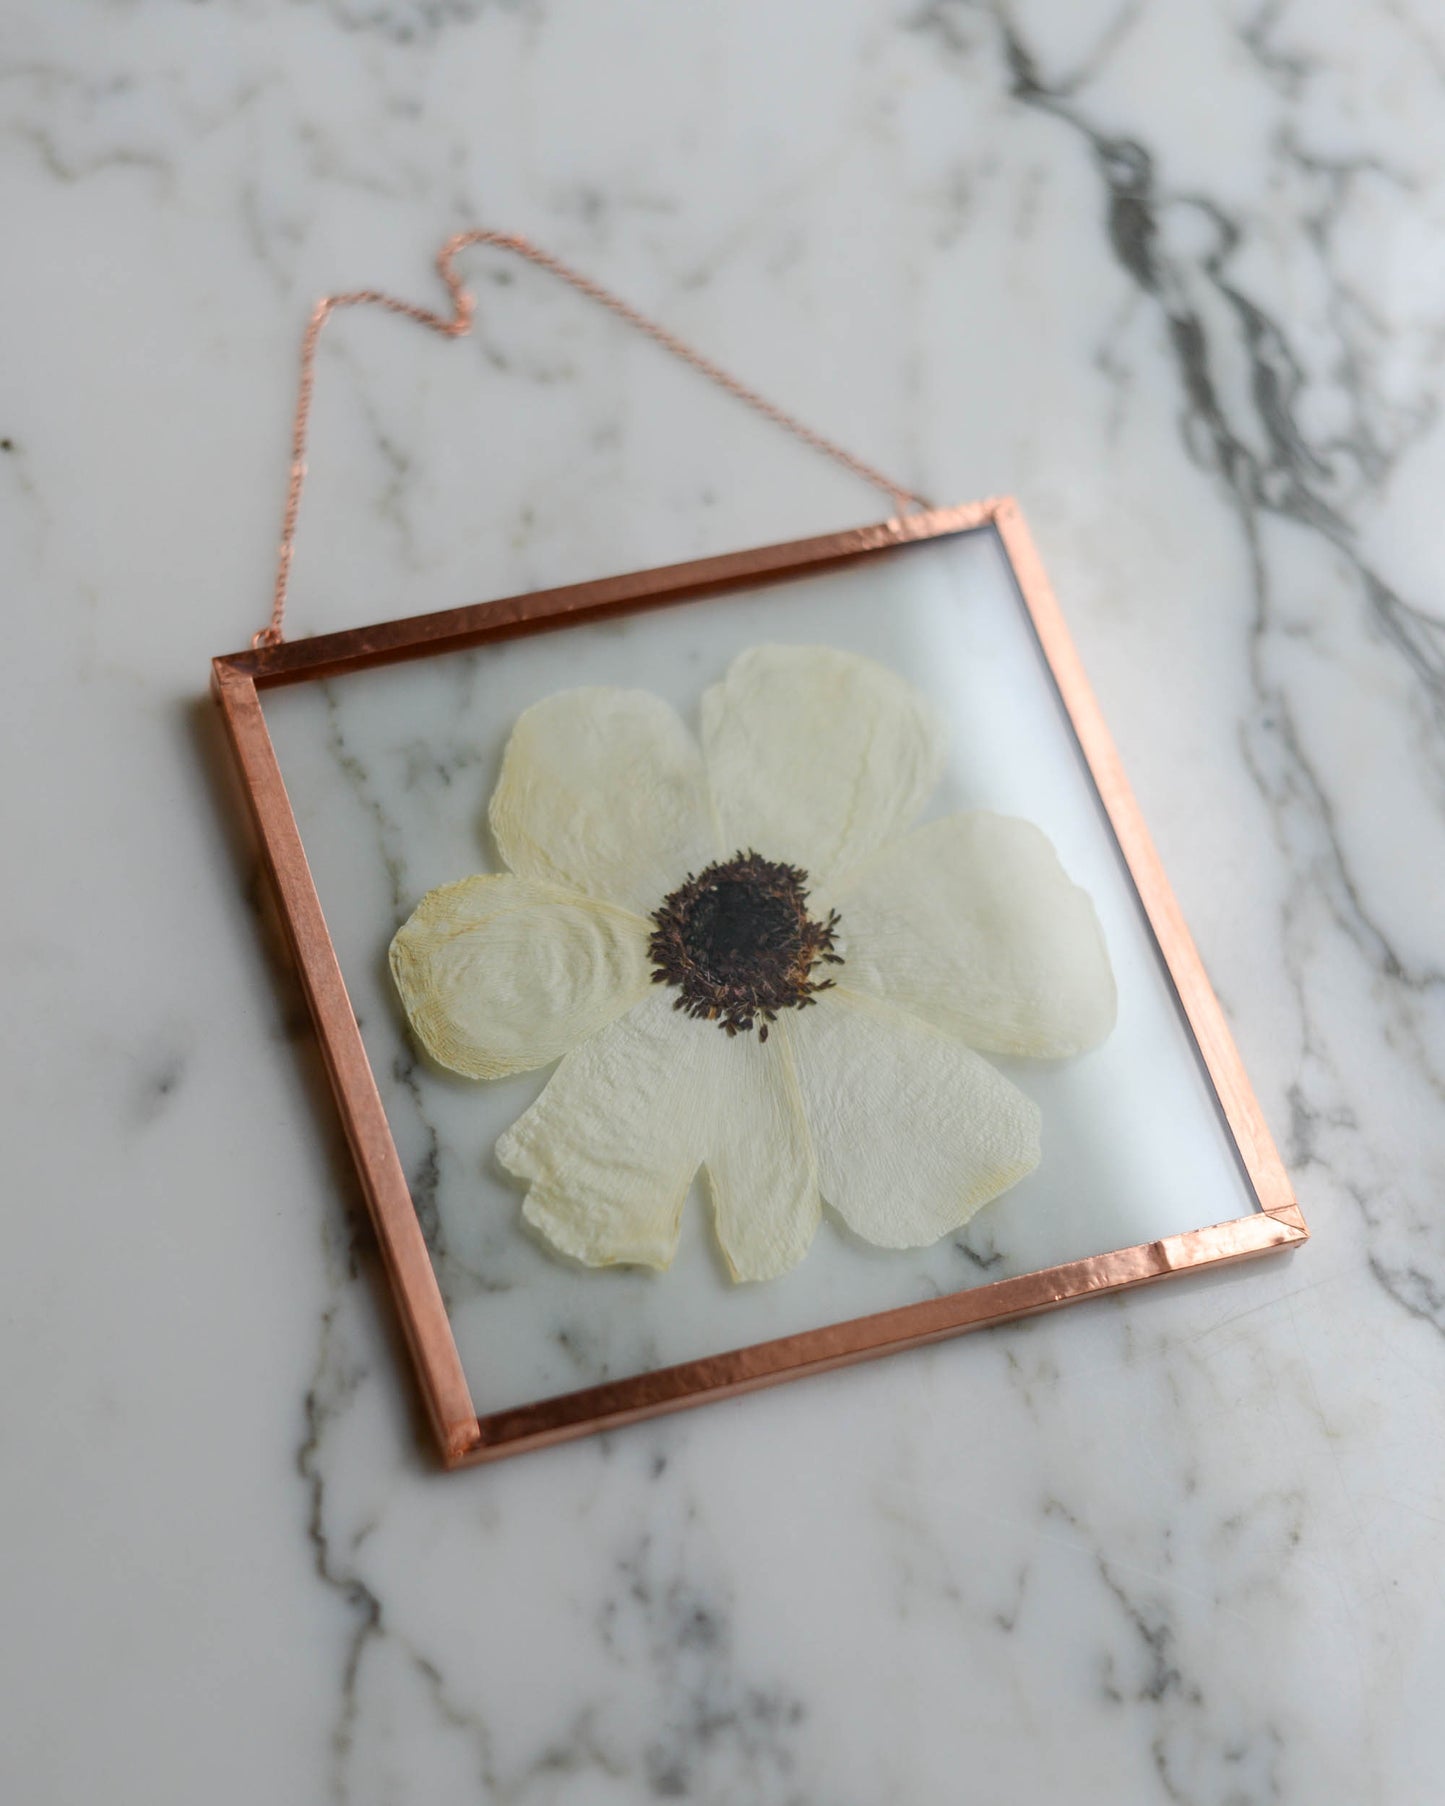 Anemone - Medium Square Glass and Copper Wall Hanging